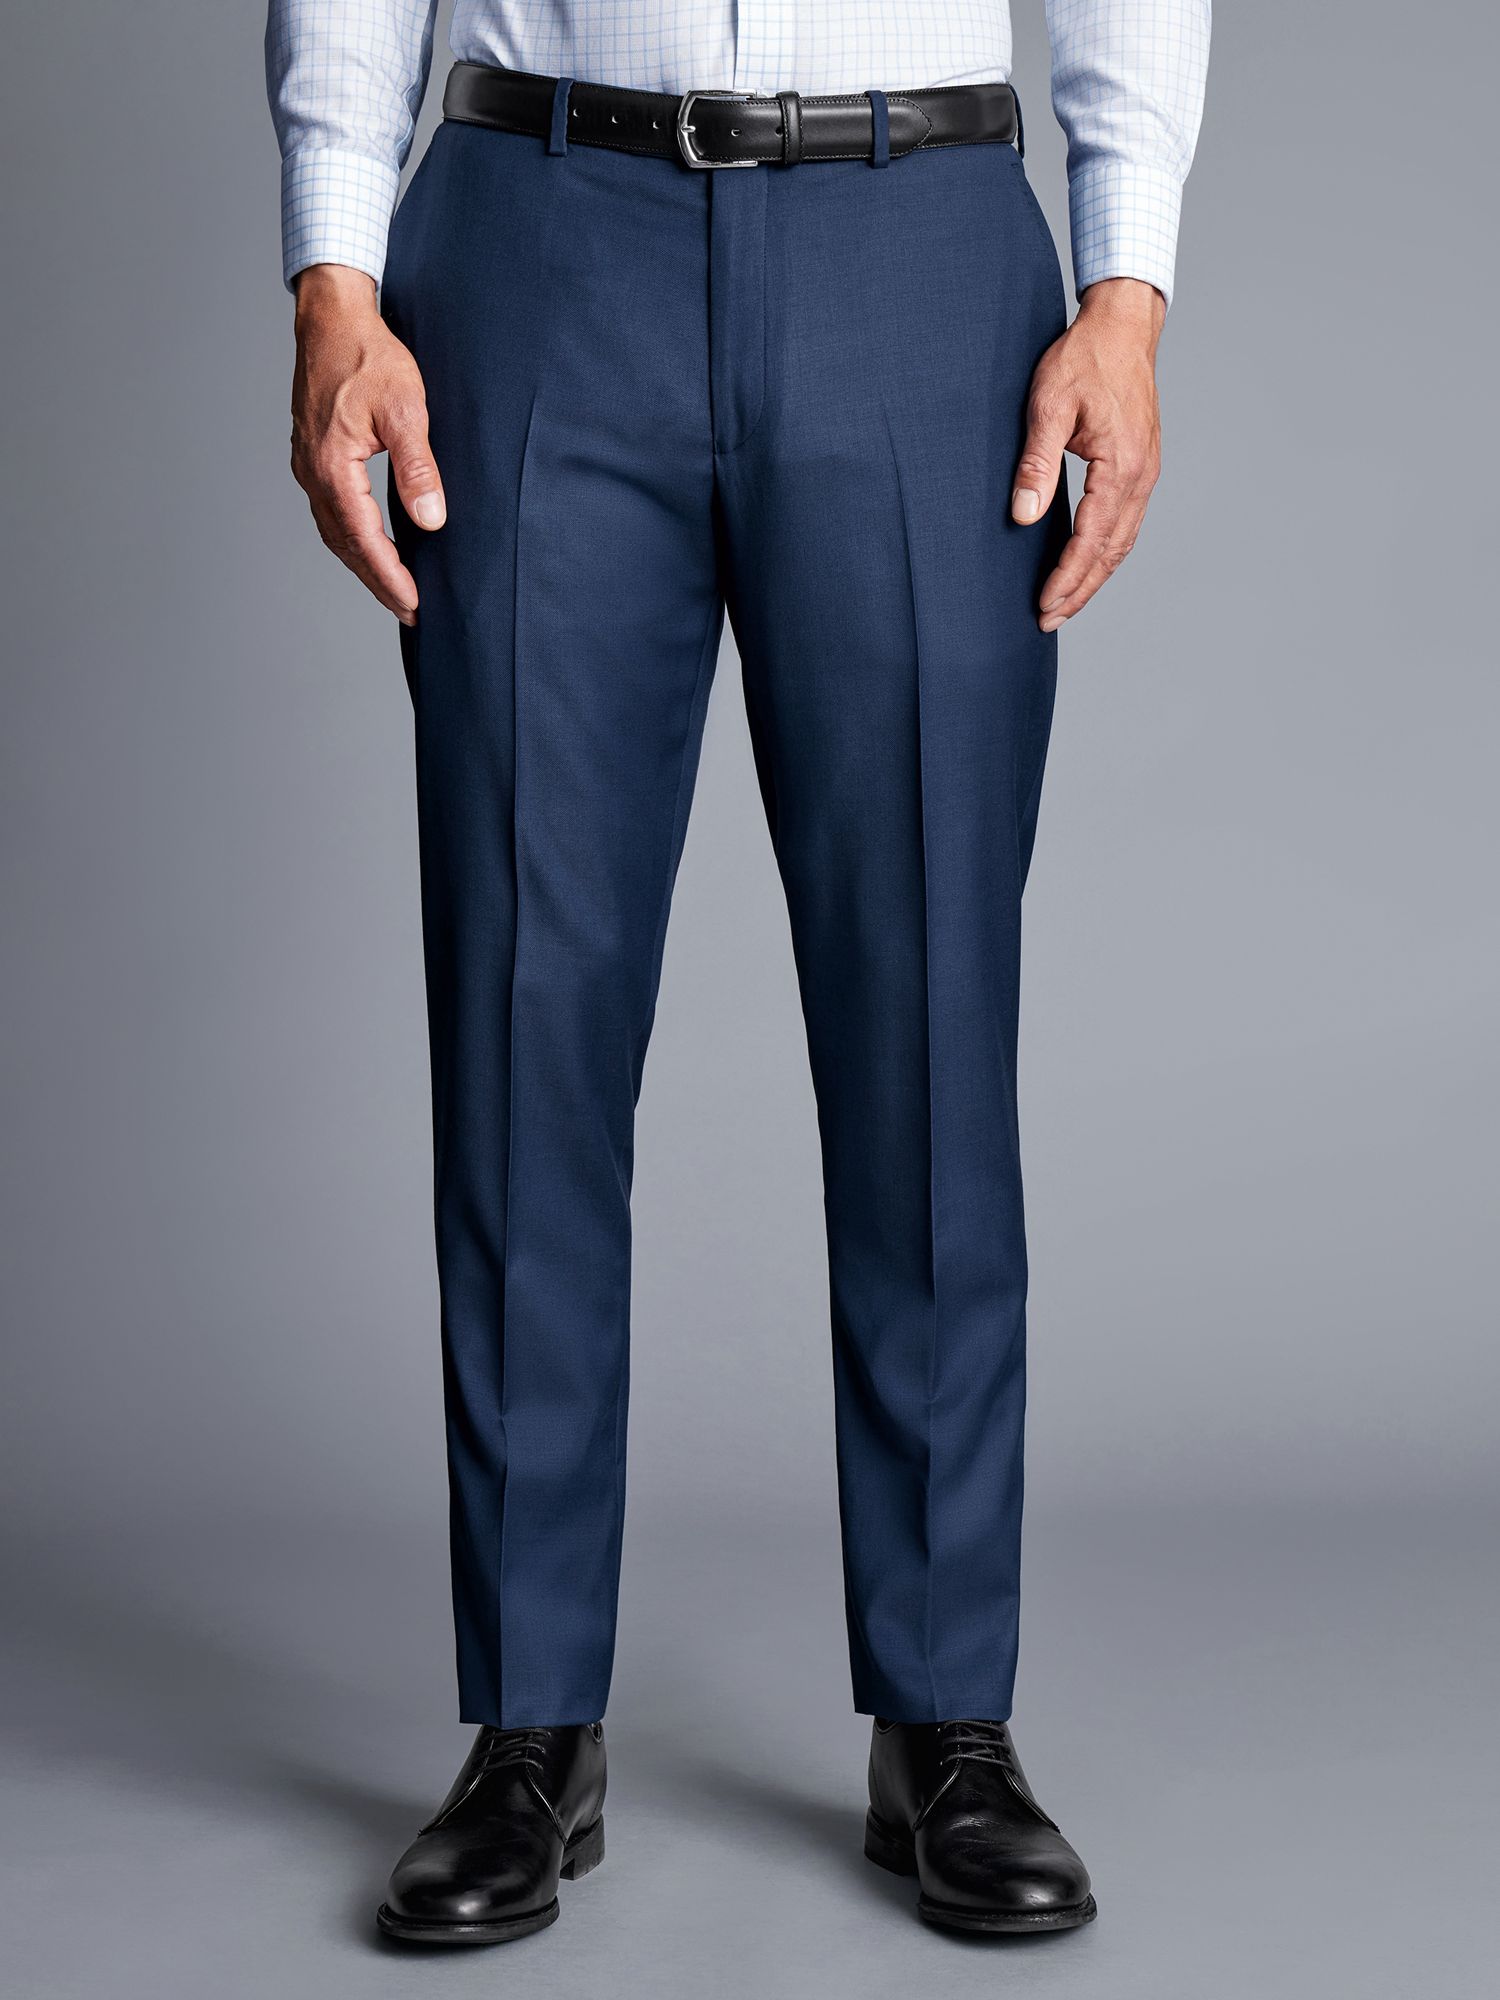 Charles Tyrwhitt Natural Stretch Twill Suit Trousers, Royal Blue